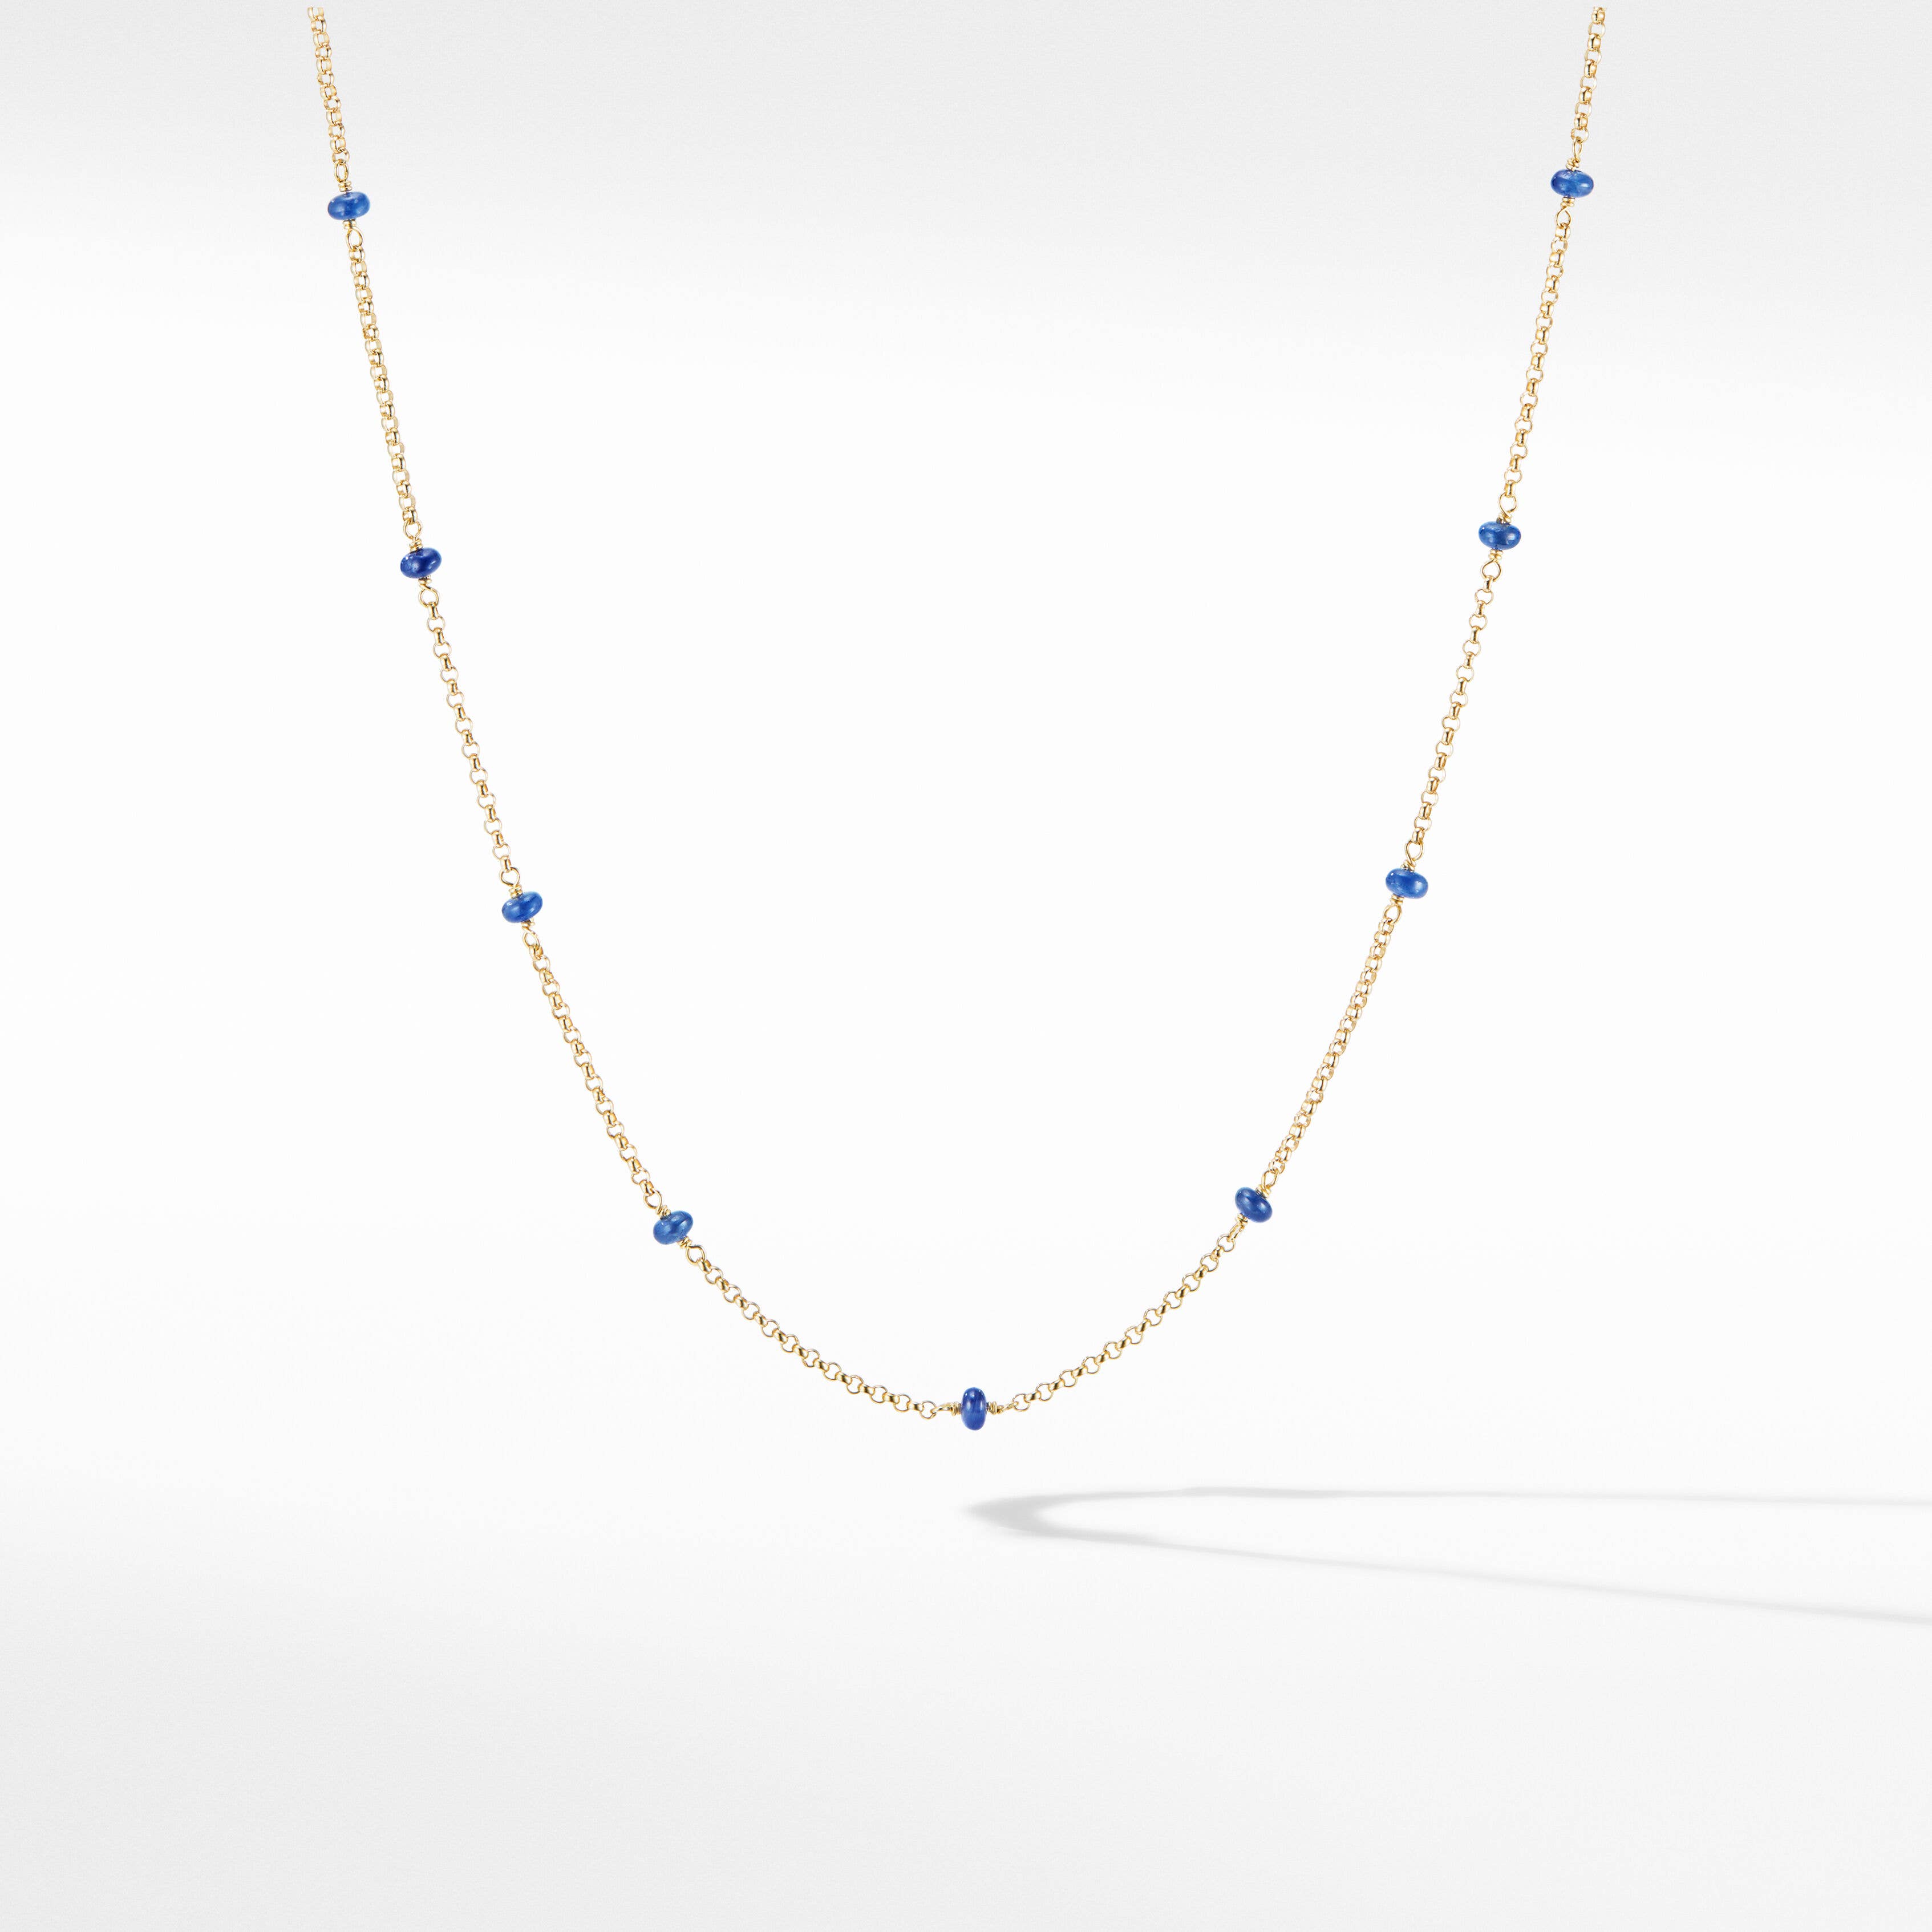 Cable Collectibles® Bead and Chain Necklace in 18K Yellow Gold with Blue Sapphires